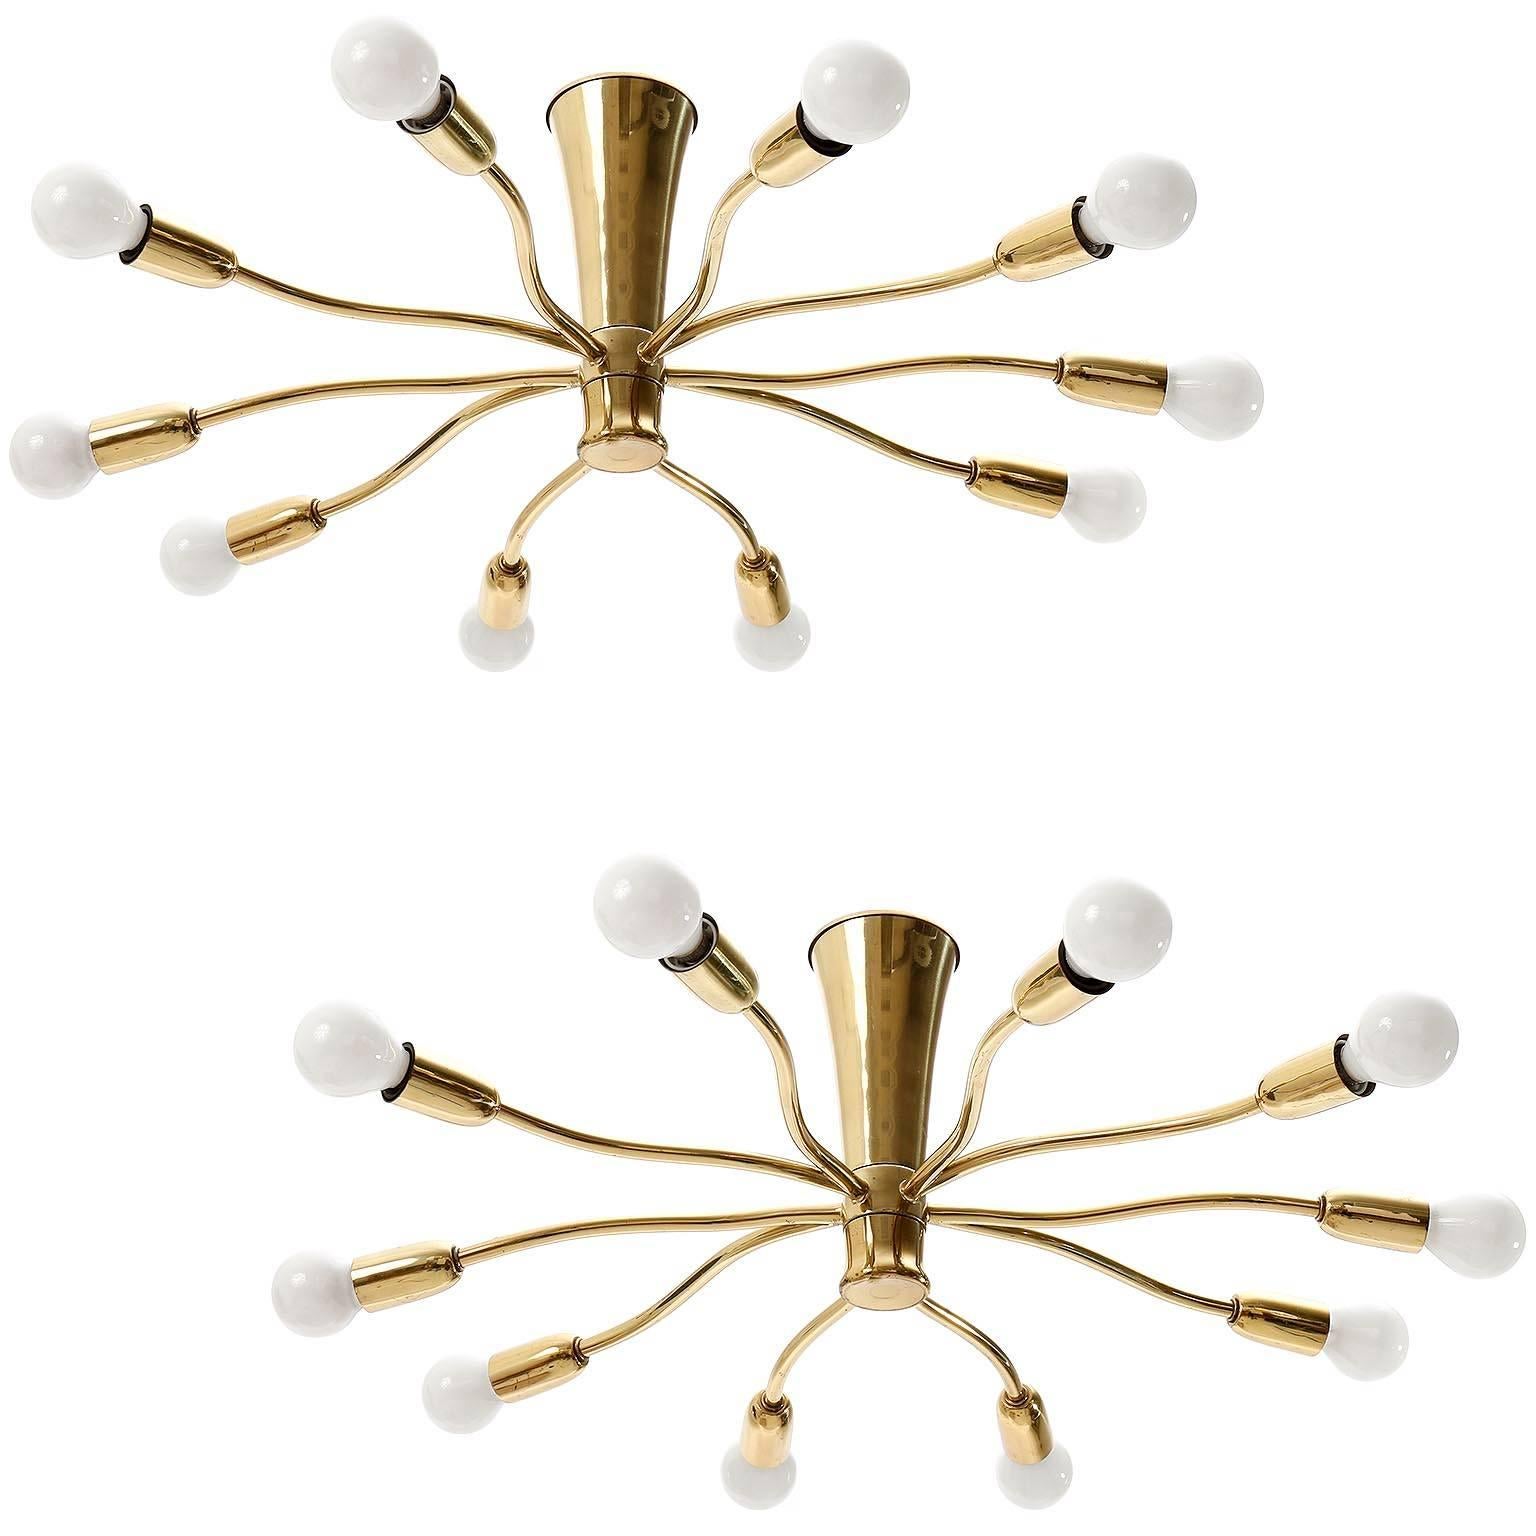 One of two 10-arm brass spider flush mount light fixtures by Kalmar, manufactured in Mid-Century, circa 1960 (late 1950s or early 1960s).
The price is per fixture. They will be sold individually or as pair.
The lamps are in excellent refurbished